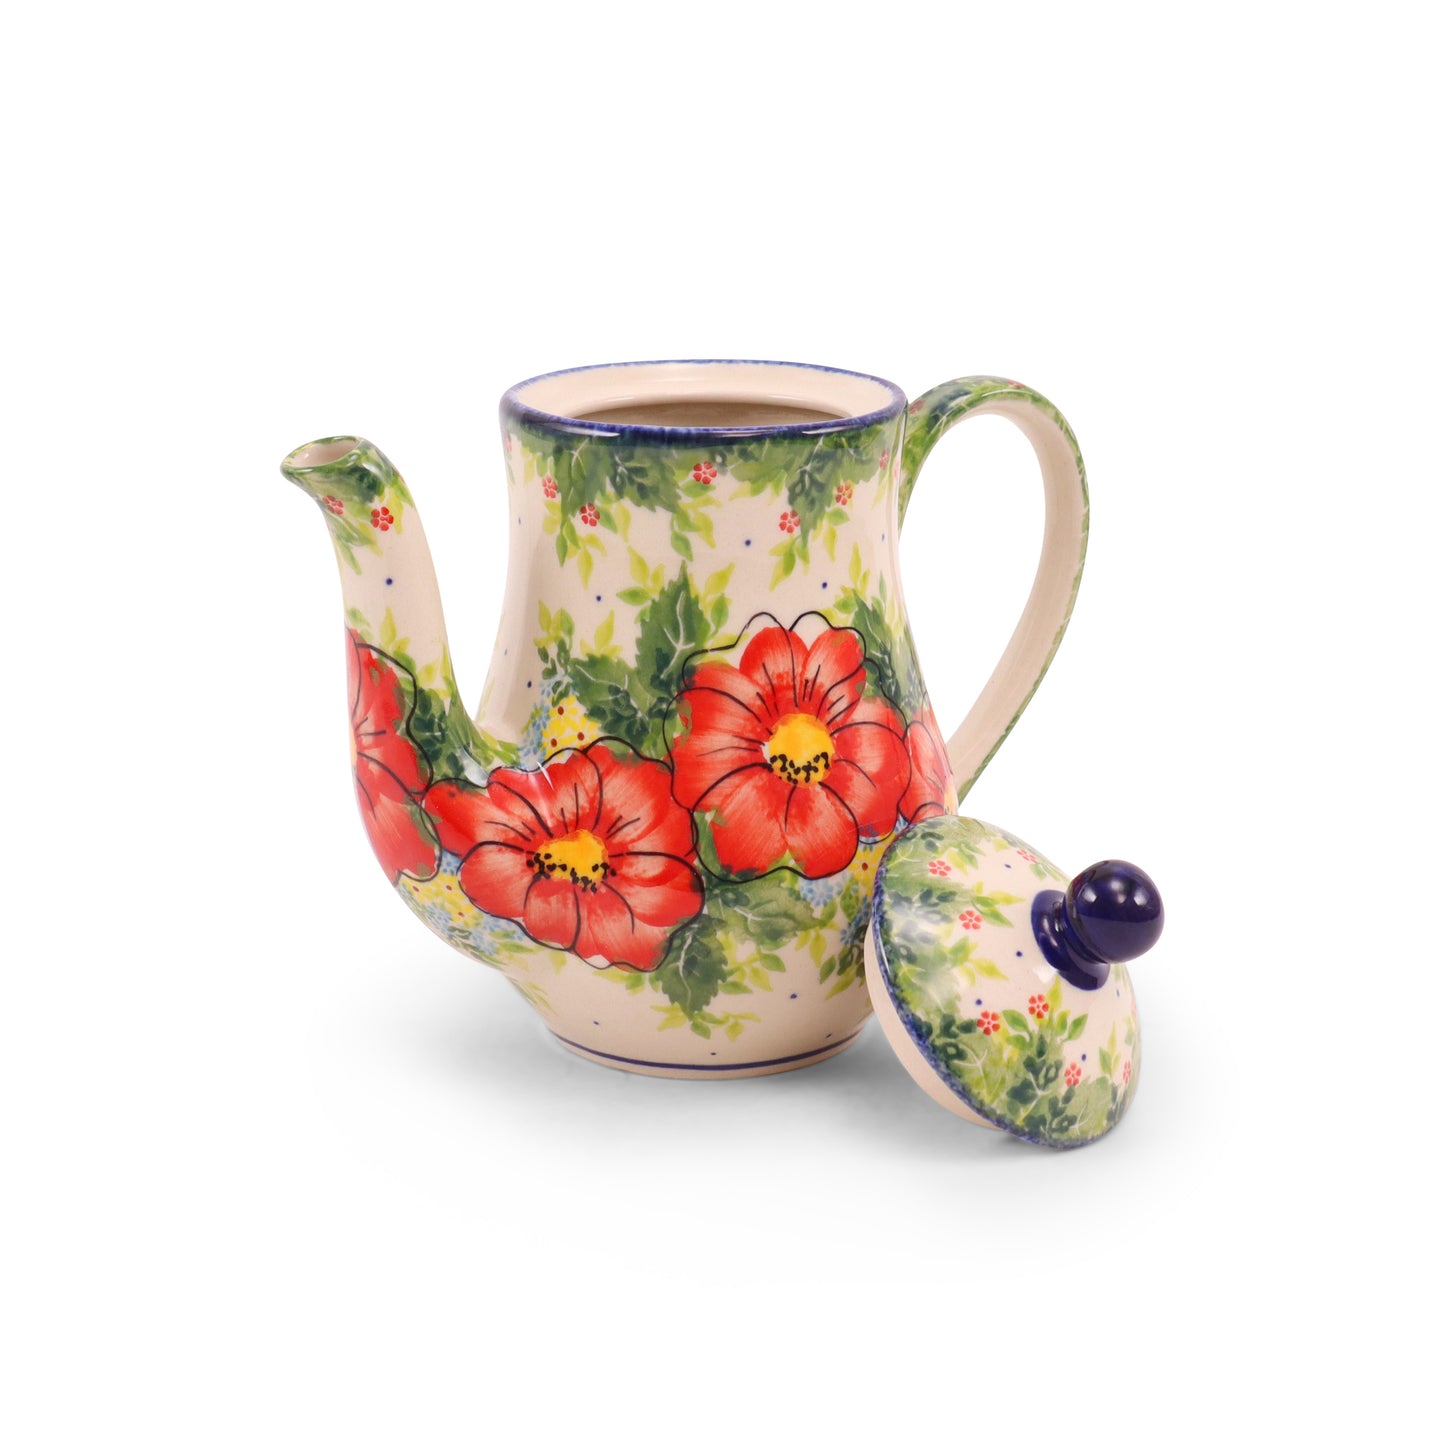 24oz Tall Teapot. Pattern: Green Valley Red